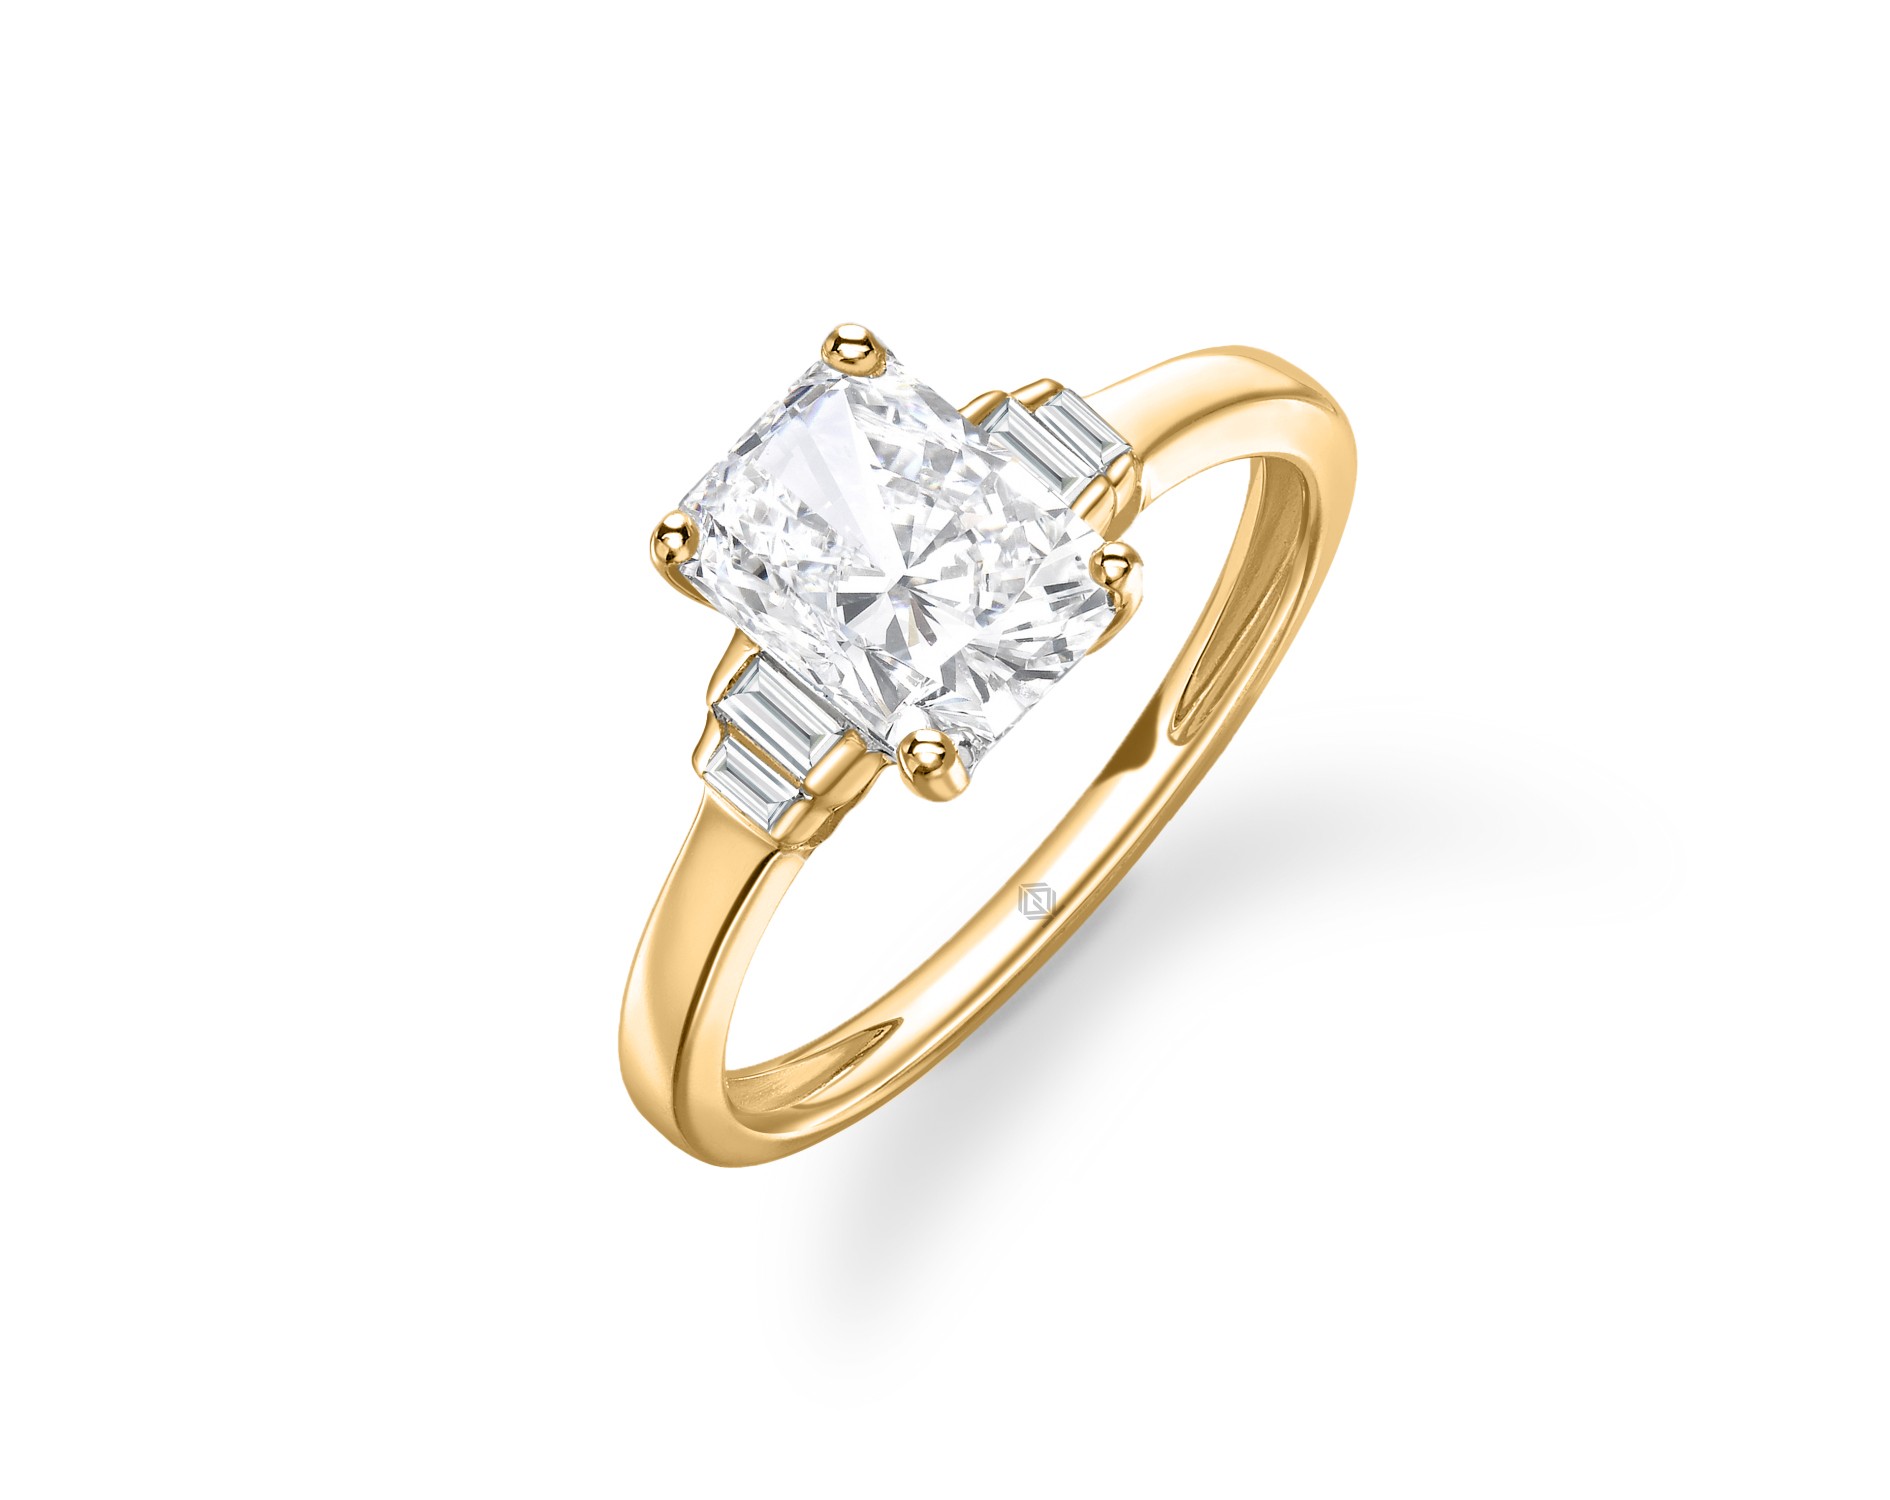 18K YELLOW GOLD RADIANT CUT DIAMOND RING WITH BAGUETTES CUT SIDE STONES